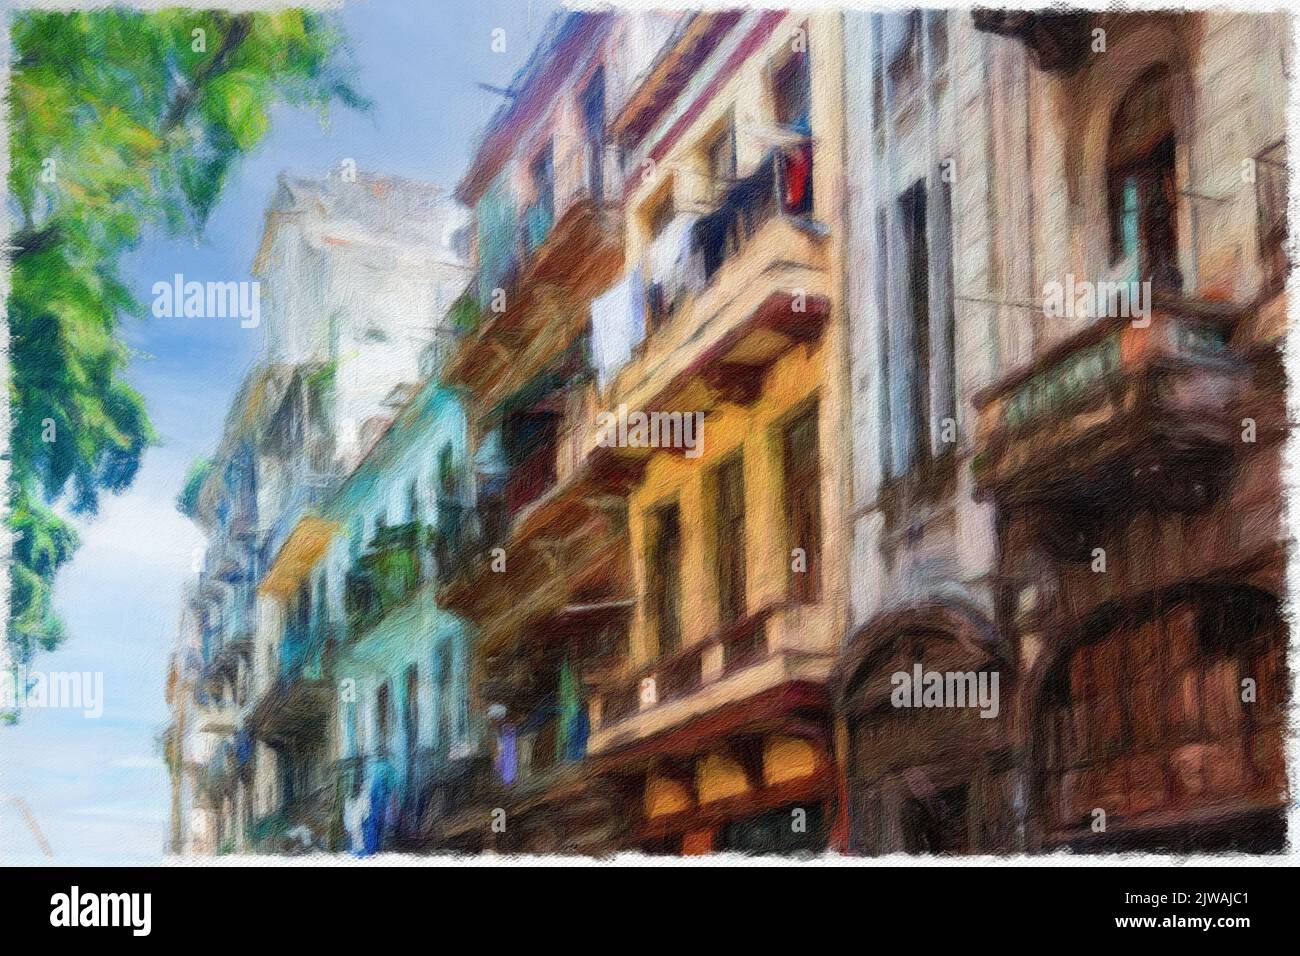 Impressionistic image of a row of buildings in downtown, Havana, Cuba. Stock Photo